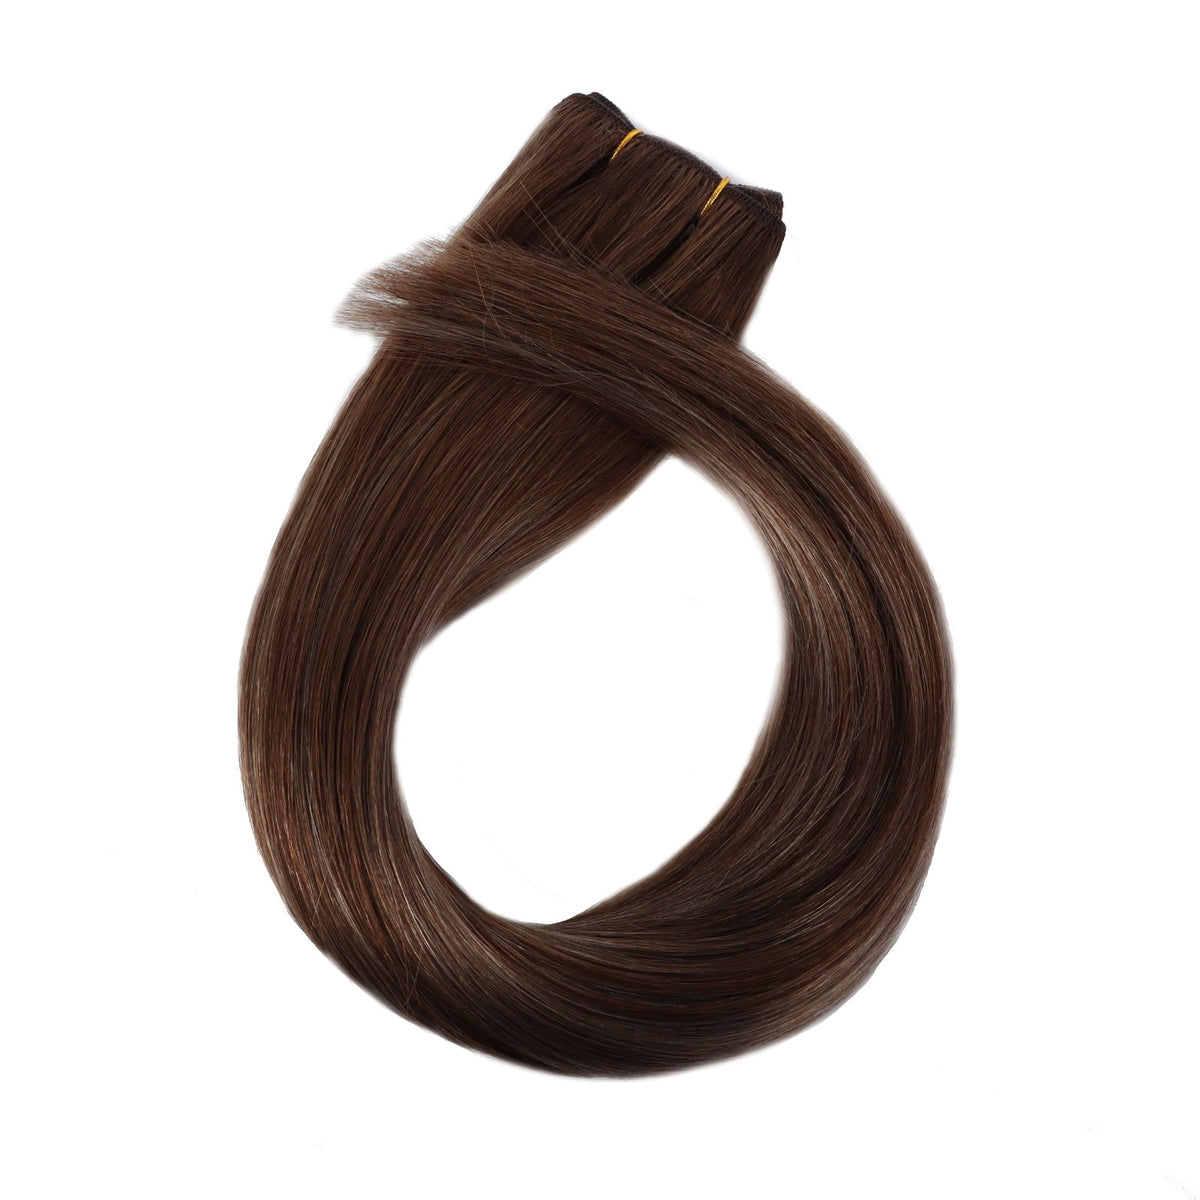 Photo of Natalie Michelle Hair Extensions in colour Choco Luxe.